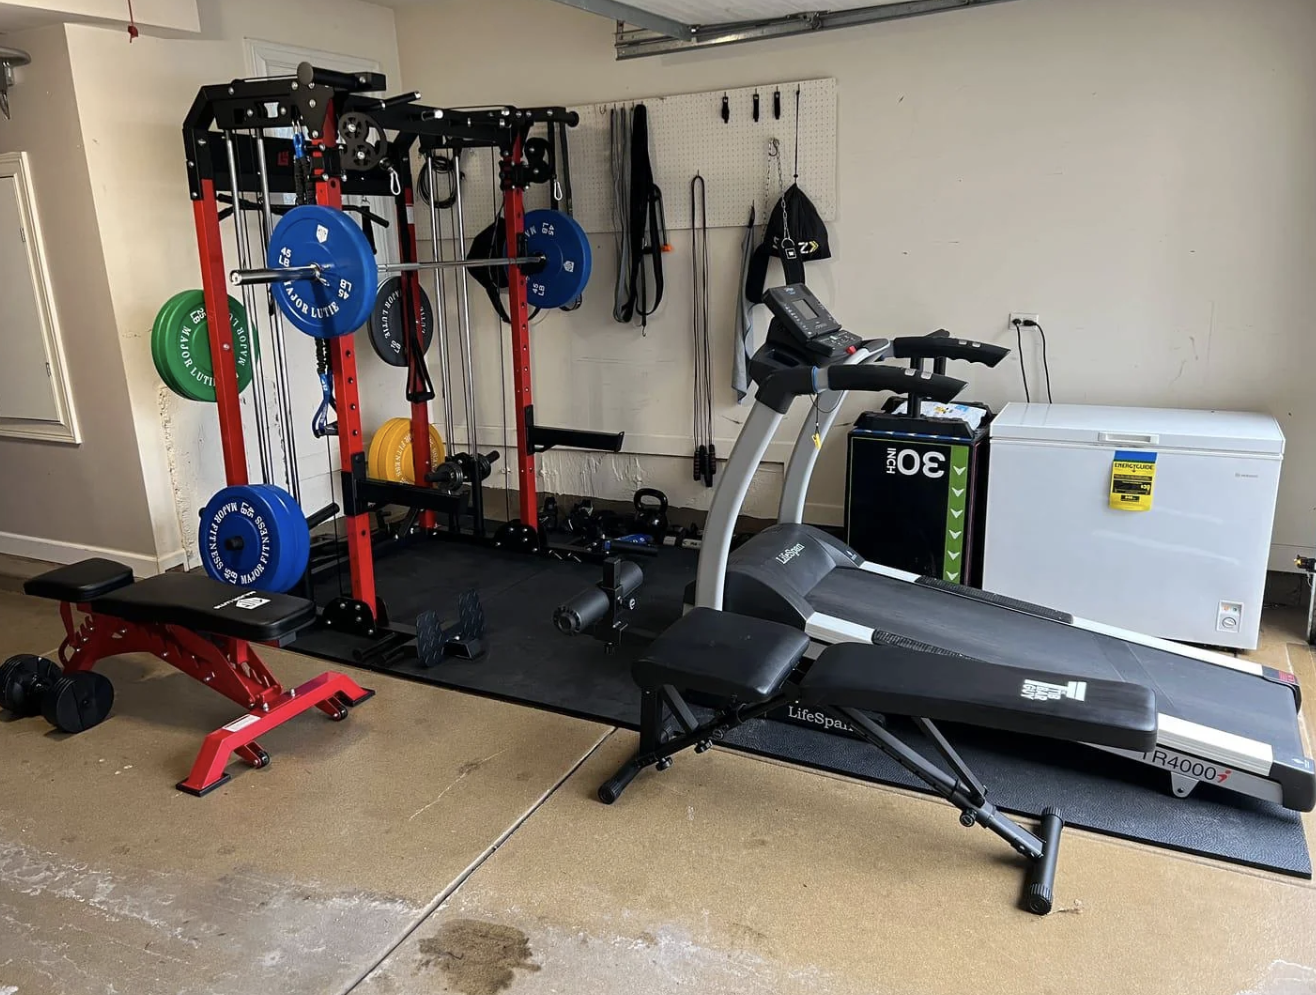 Home gym setup with various exercise equipment including a treadmill, weights, and bench